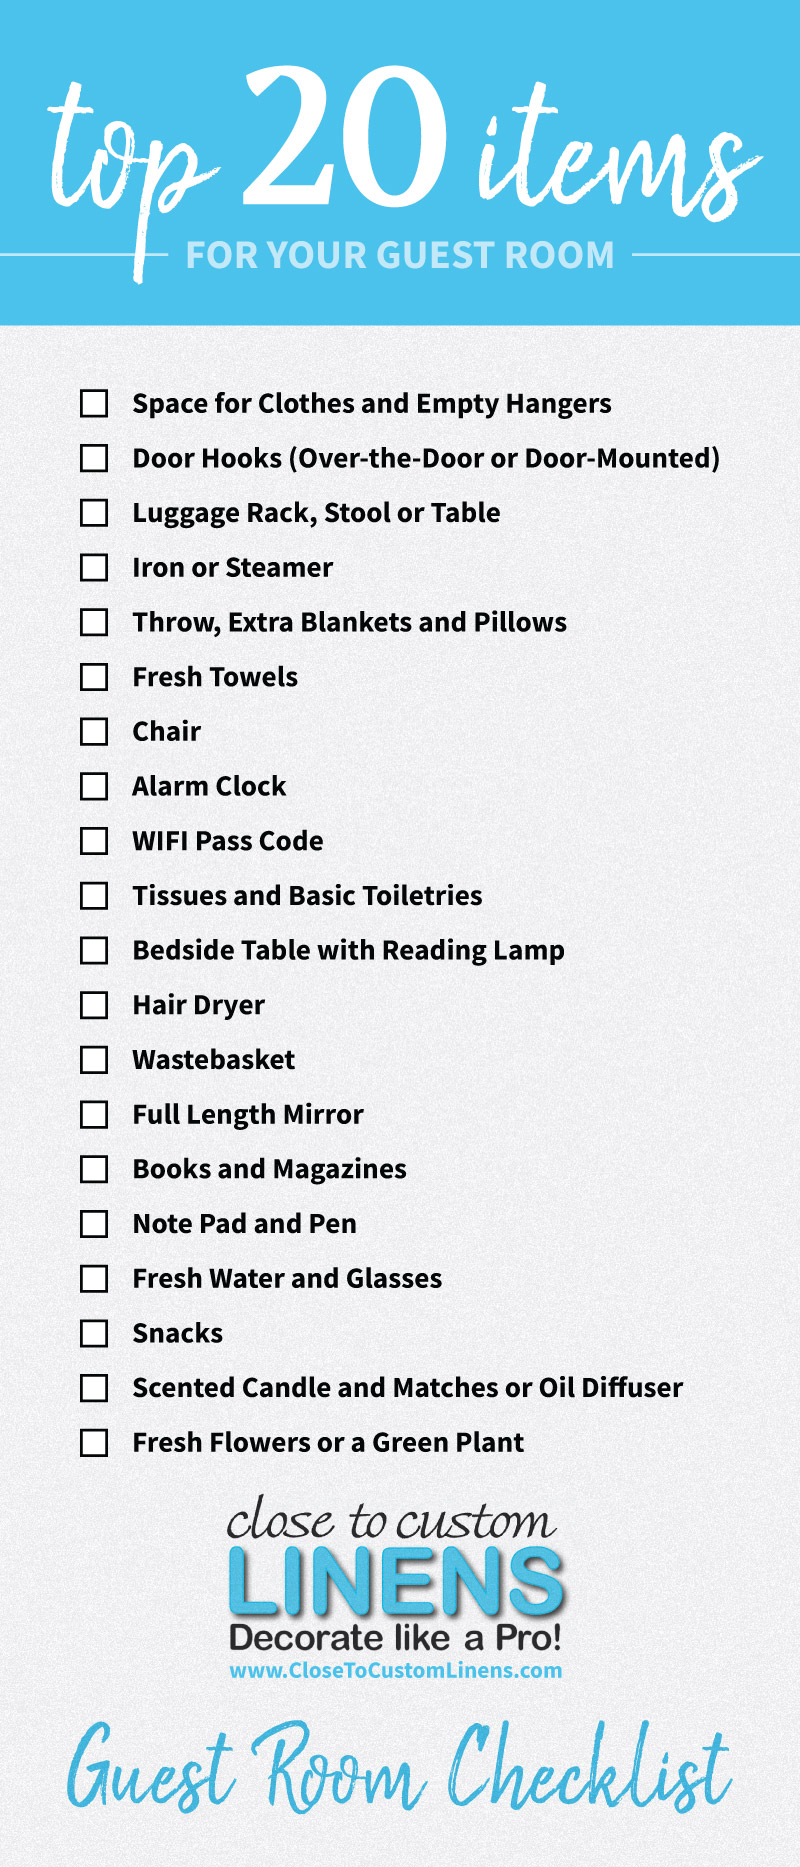 Guest Room Checklist Top 20 Items to Include When Decorating a Spare